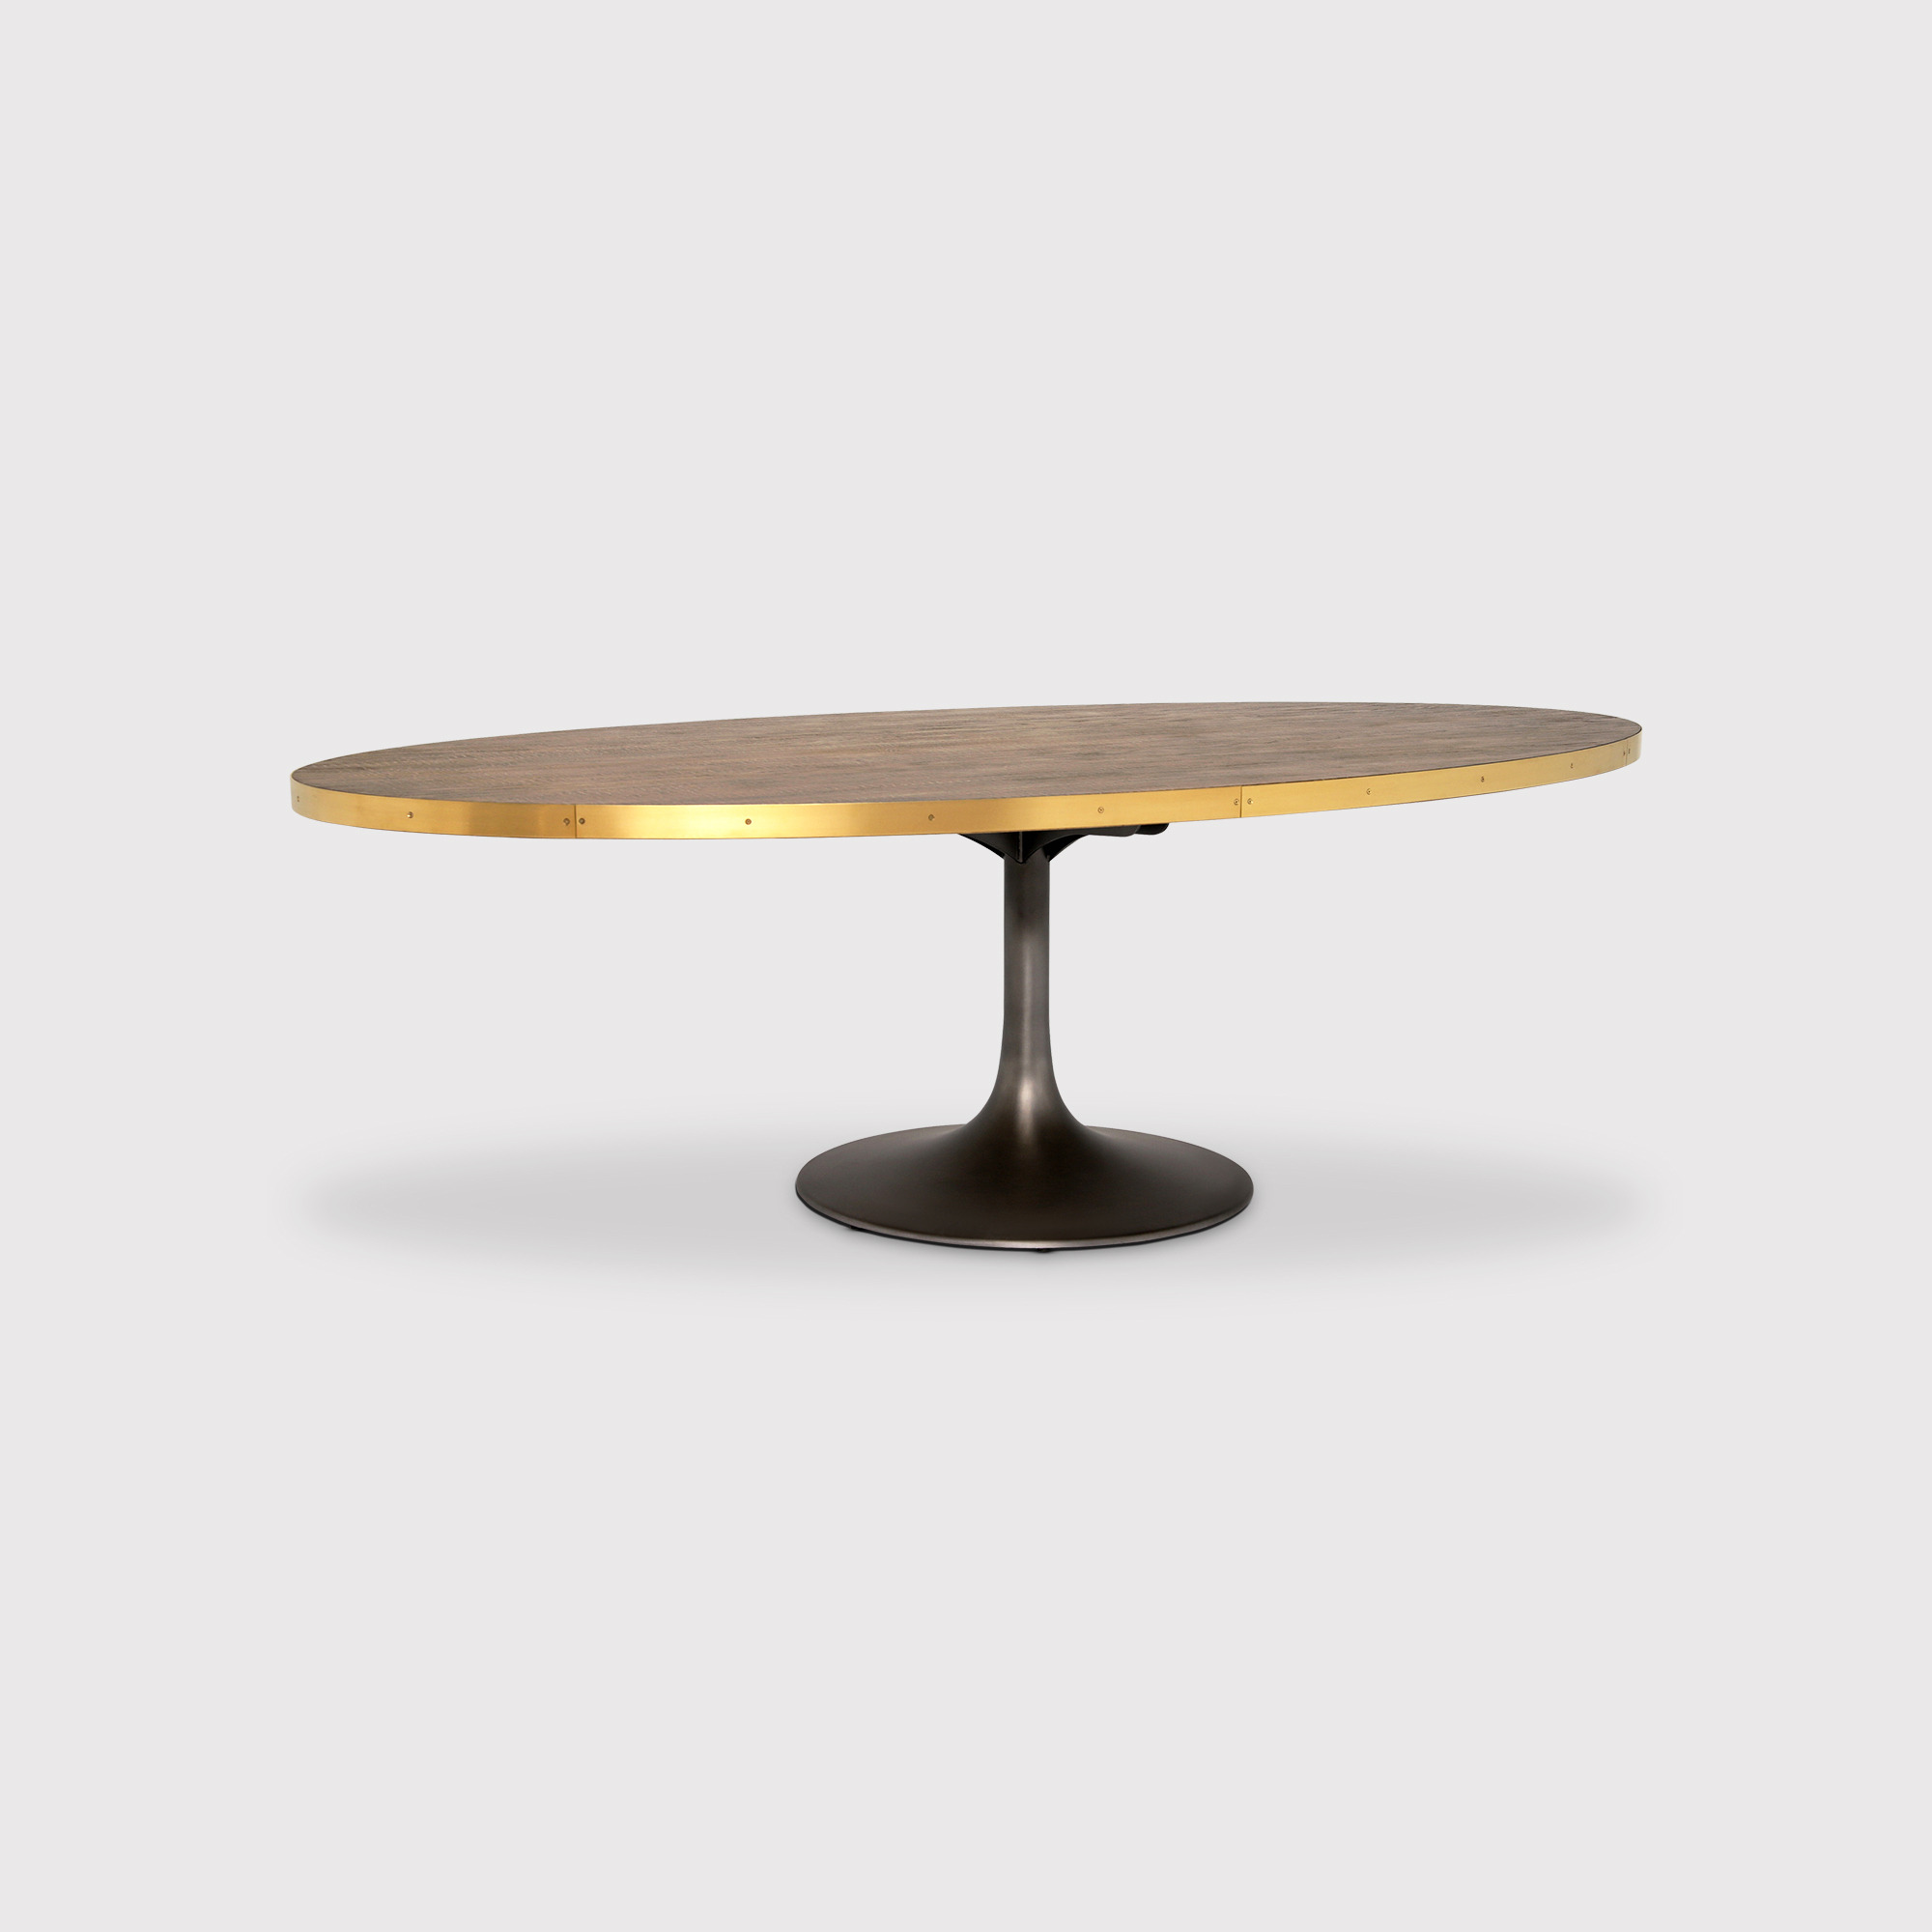 Talula Tulip Oval Dining Table 250x130x78cm, Neutral Wood - Barker & Stonehouse - image 1